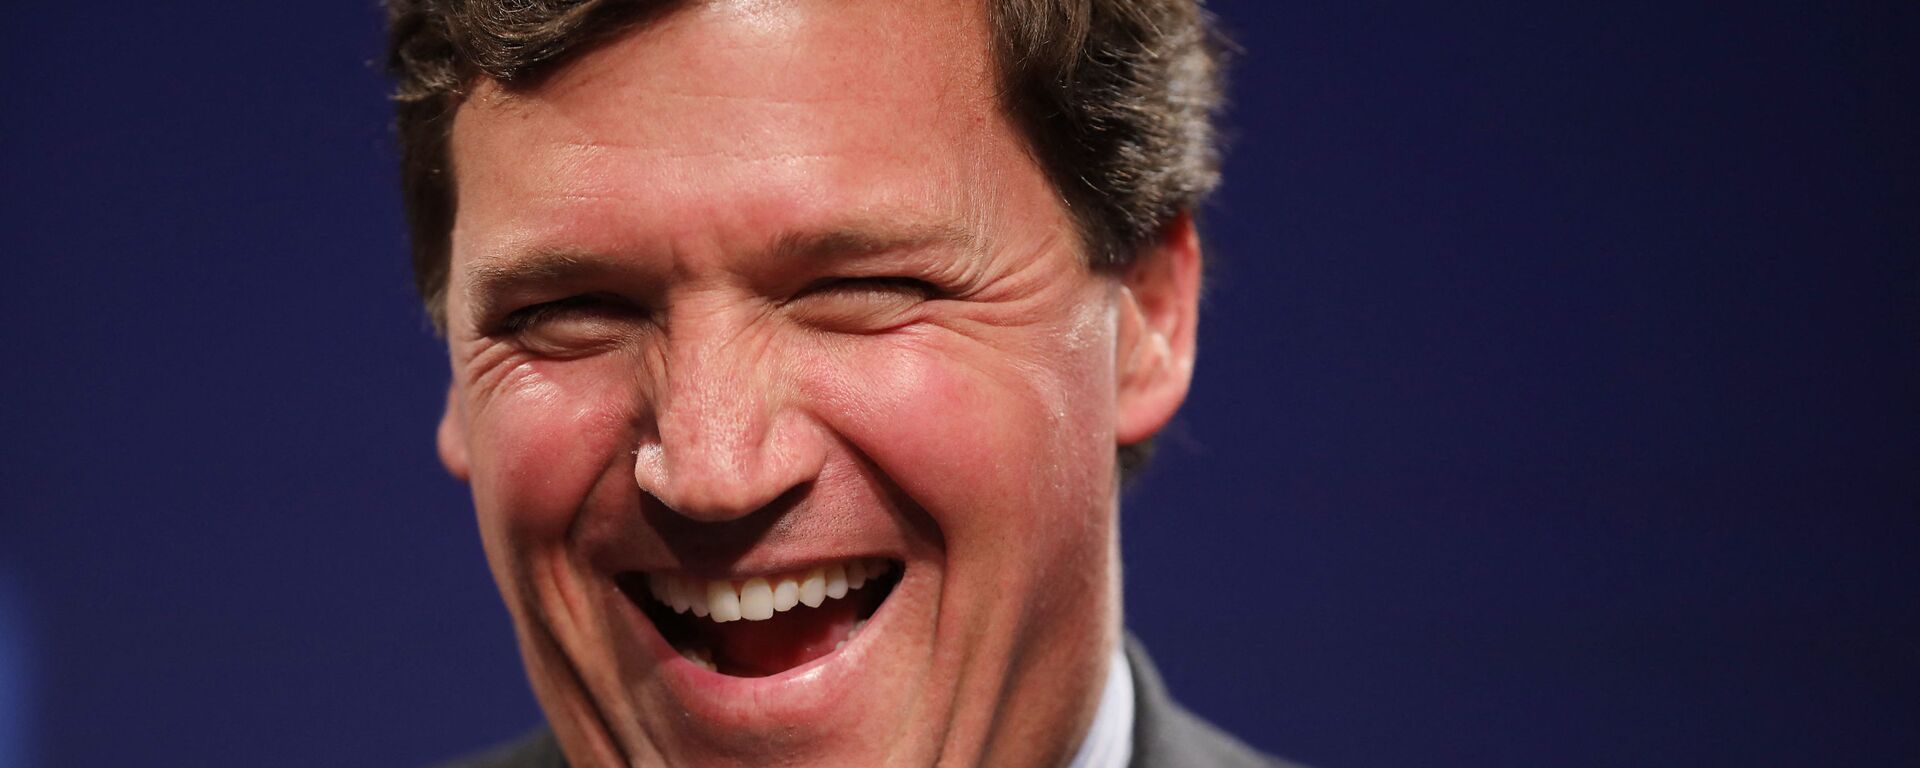 WASHINGTON, DC - MARCH 29: Fox News host Tucker Carlson discusses 'Populism and the Right' during the National Review Institute's Ideas Summit at the Mandarin Oriental Hotel March 29, 2019 in Washington, DC. Carlson talked about a large variety of topics including dropping testosterone levels, increasing rates of suicide, unemployment, drug addiction and social hierarchy at the summit, which had the theme 'The Case for the American Experiment.'  - Sputnik International, 1920, 08.03.2023